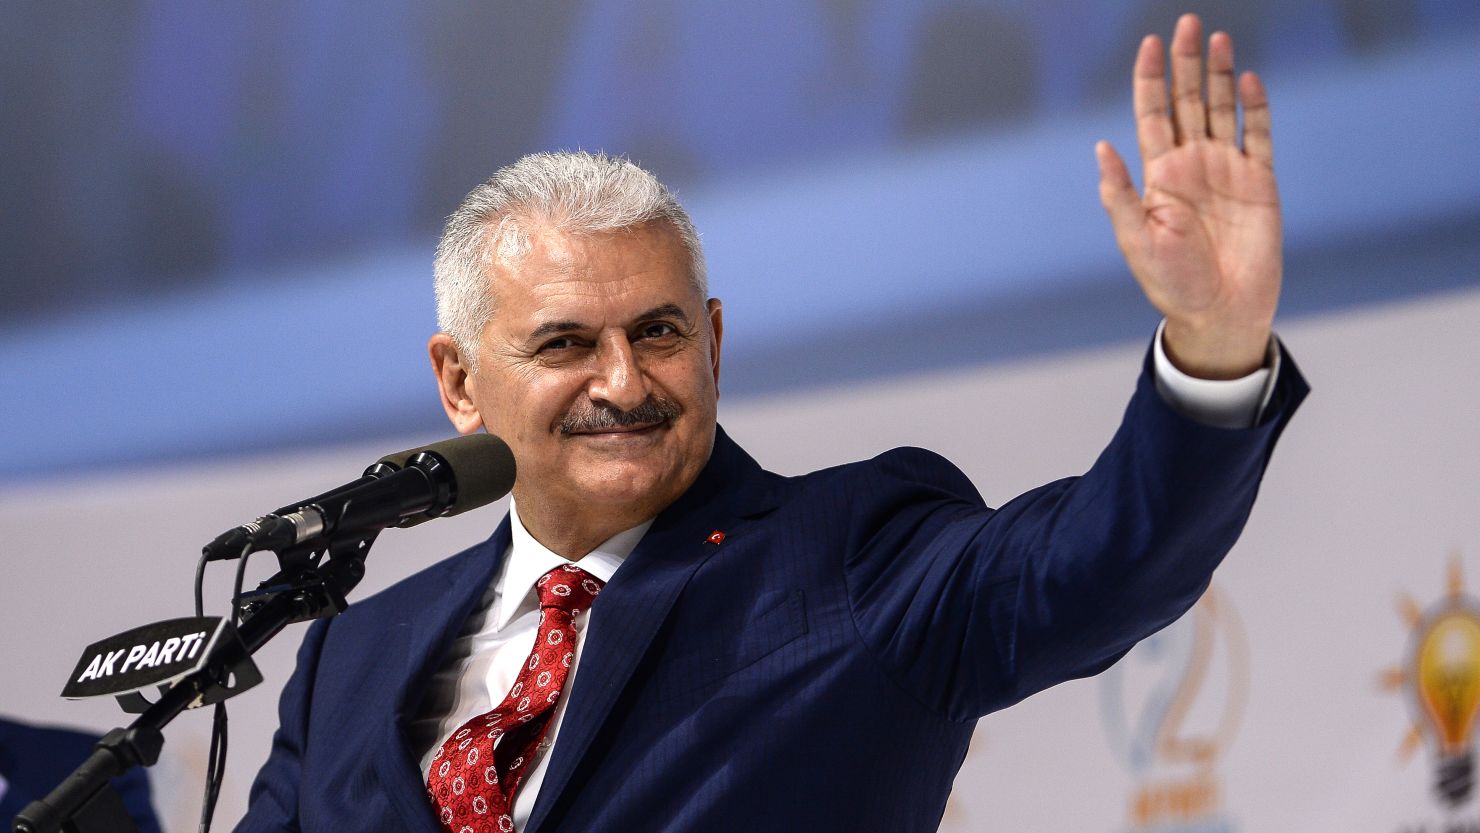 Binali Yildirim is the newly elected chairman of Turkey's ruling Justice and Development Party.